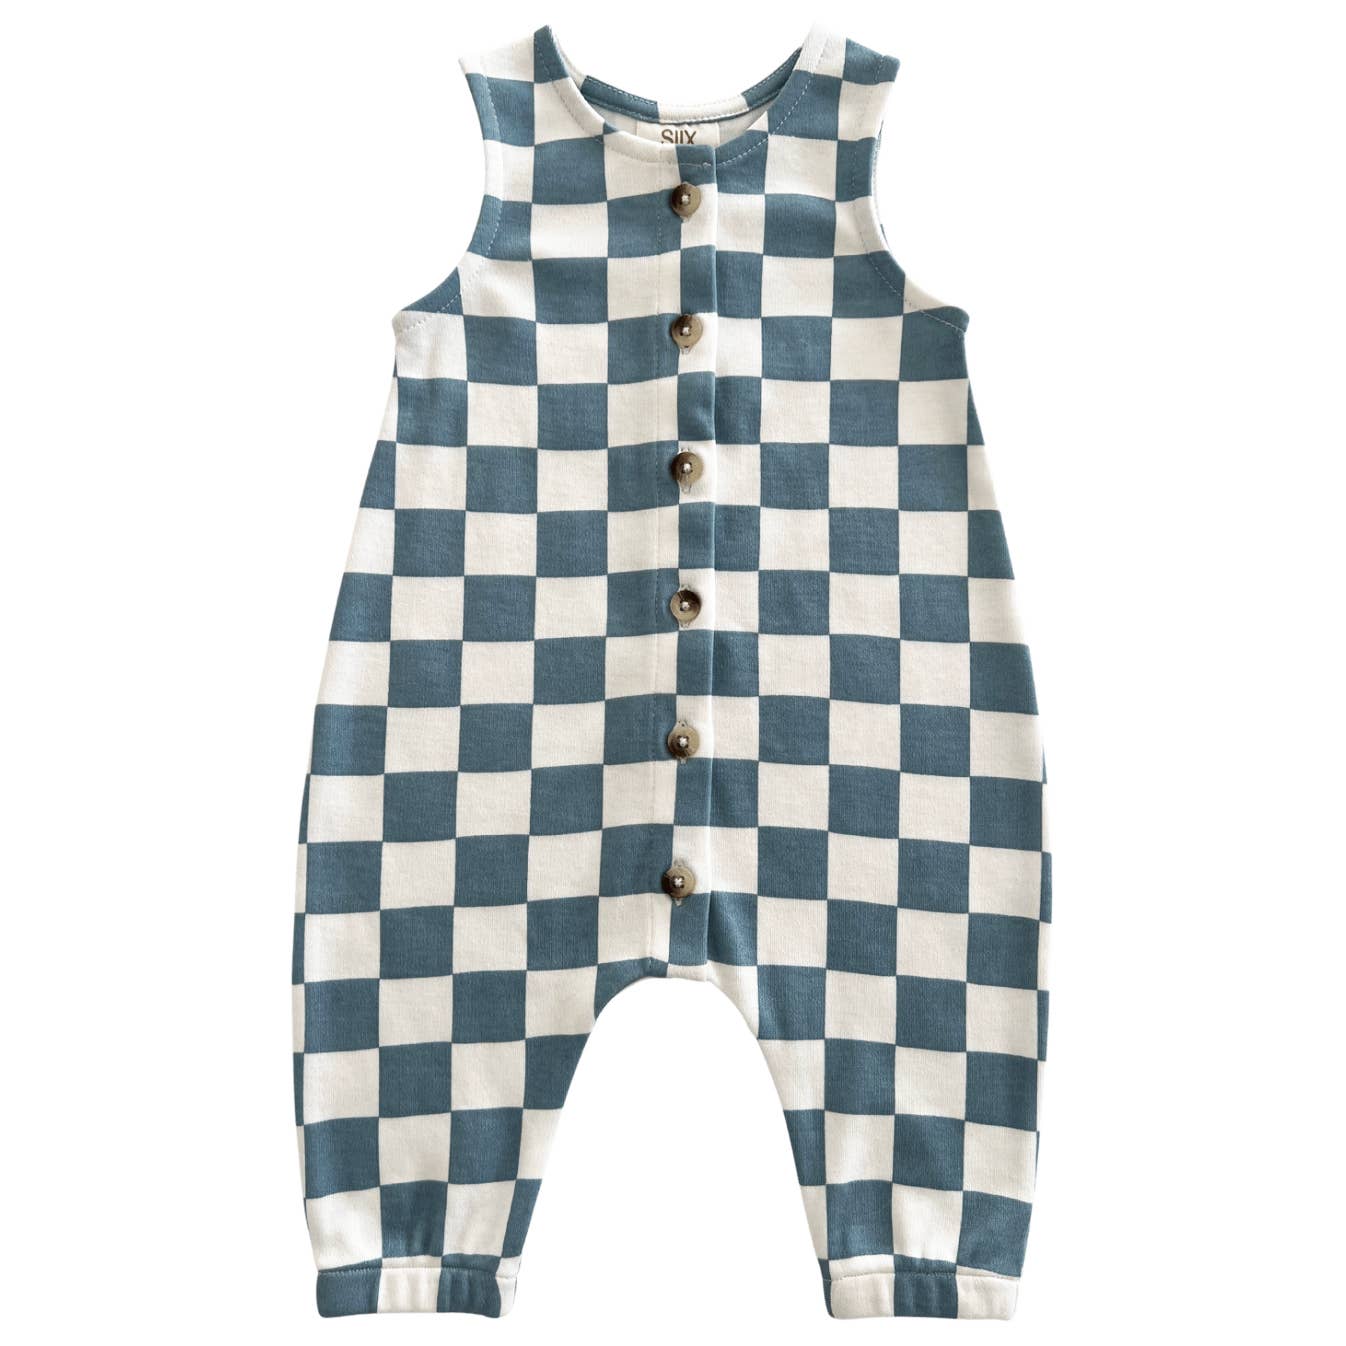 SIIX Collection - Blueberry Muffin Checkerboard / Organic Bay Jumpsuit